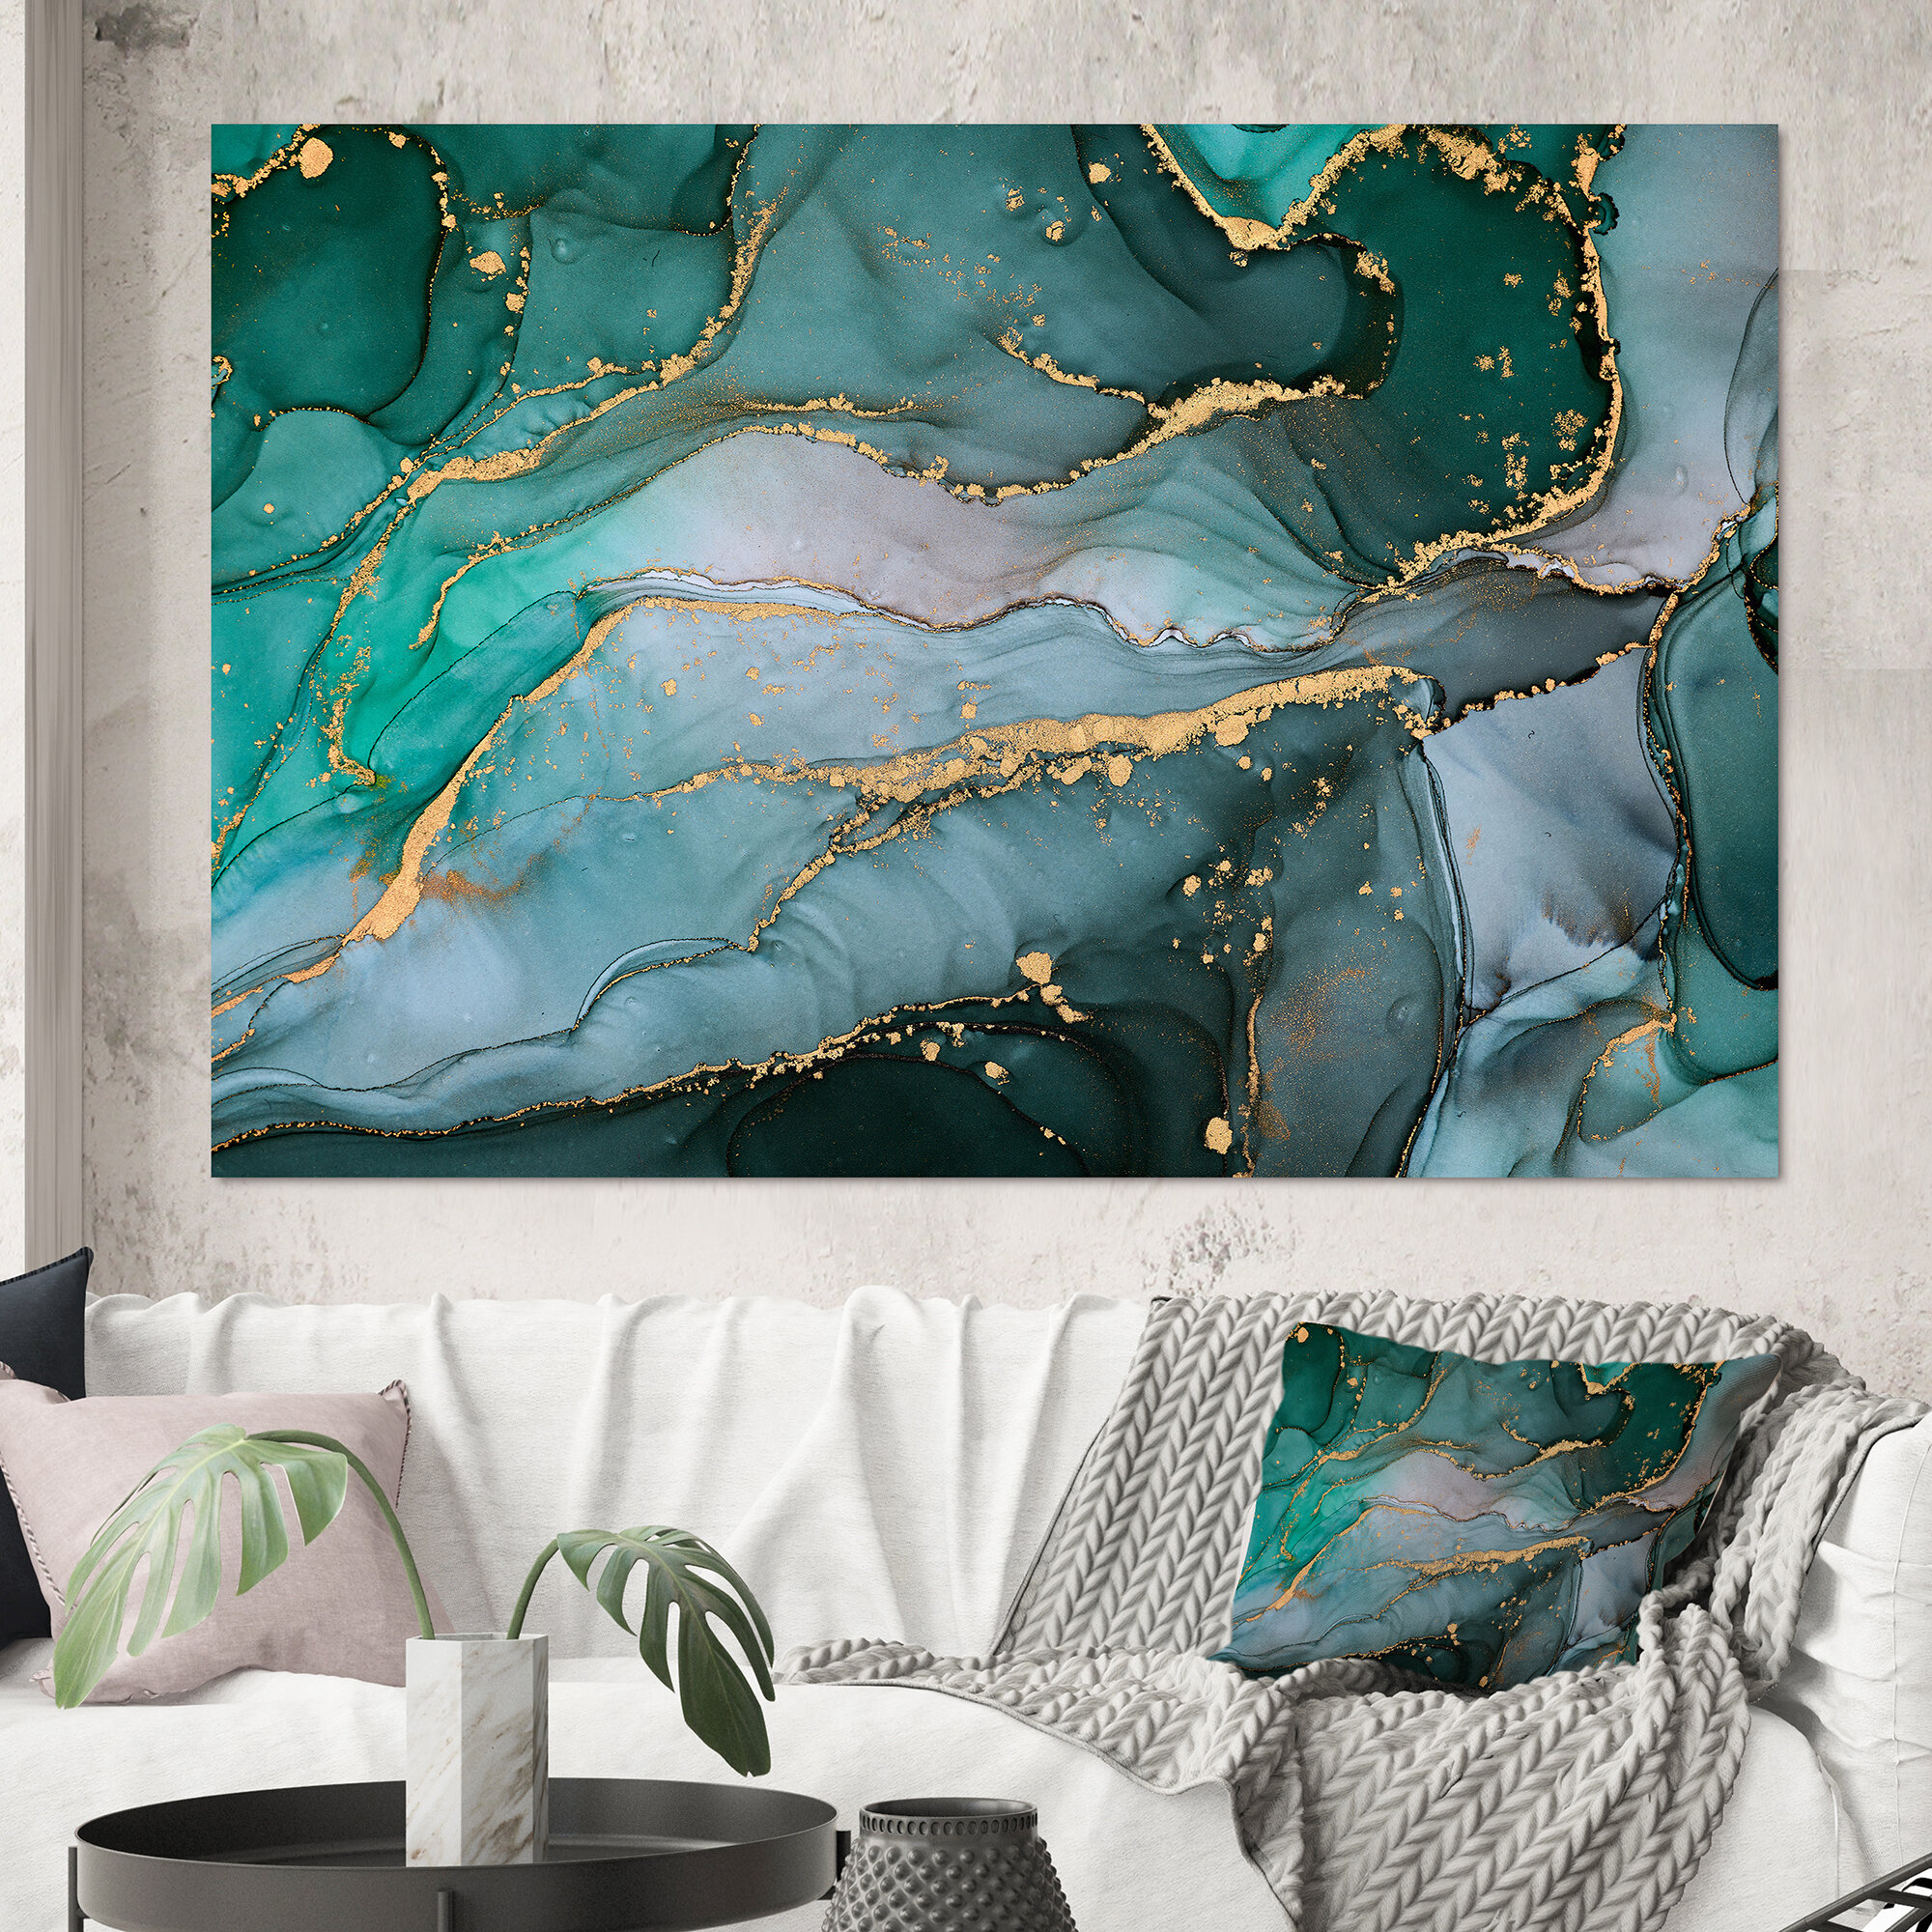 Bless international Turquoise And Grey Luxury Abstract Fluid Art II